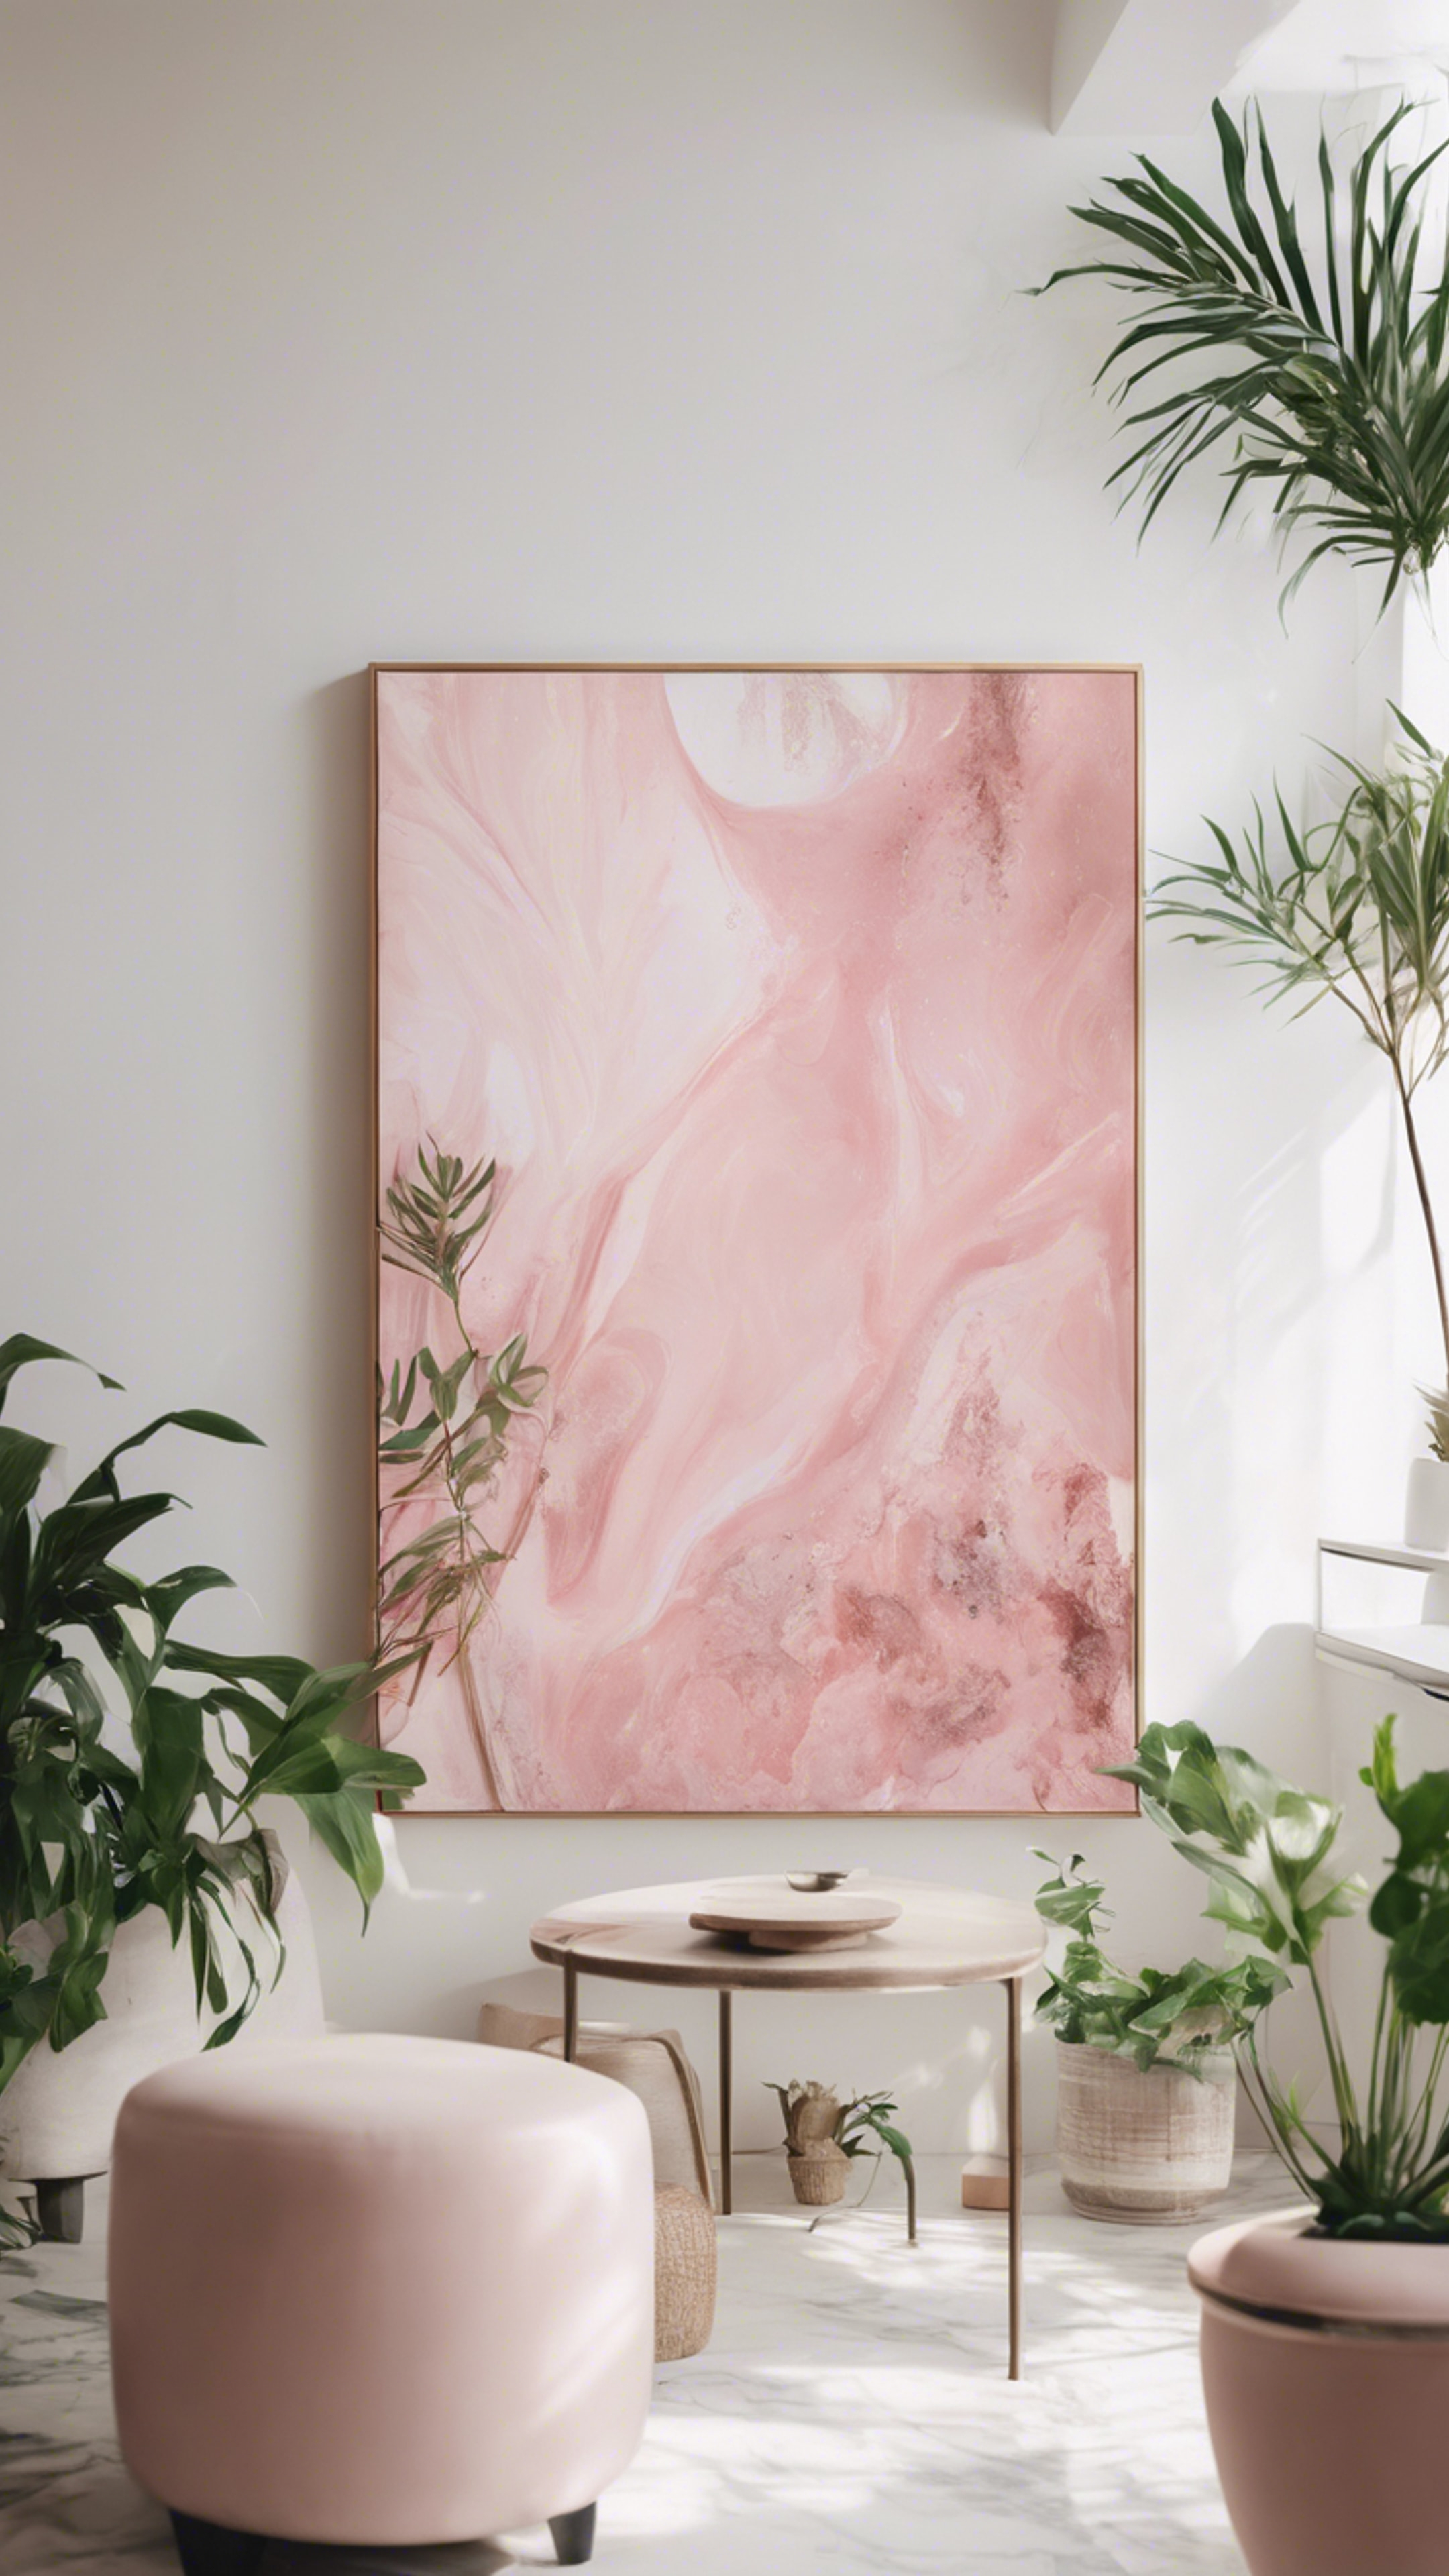 A soft pink abstract painting on a white wall surrounded by indoor plants, enhancing the aesthetic of the room壁紙[9fa4f1f3650f4fbb9955]